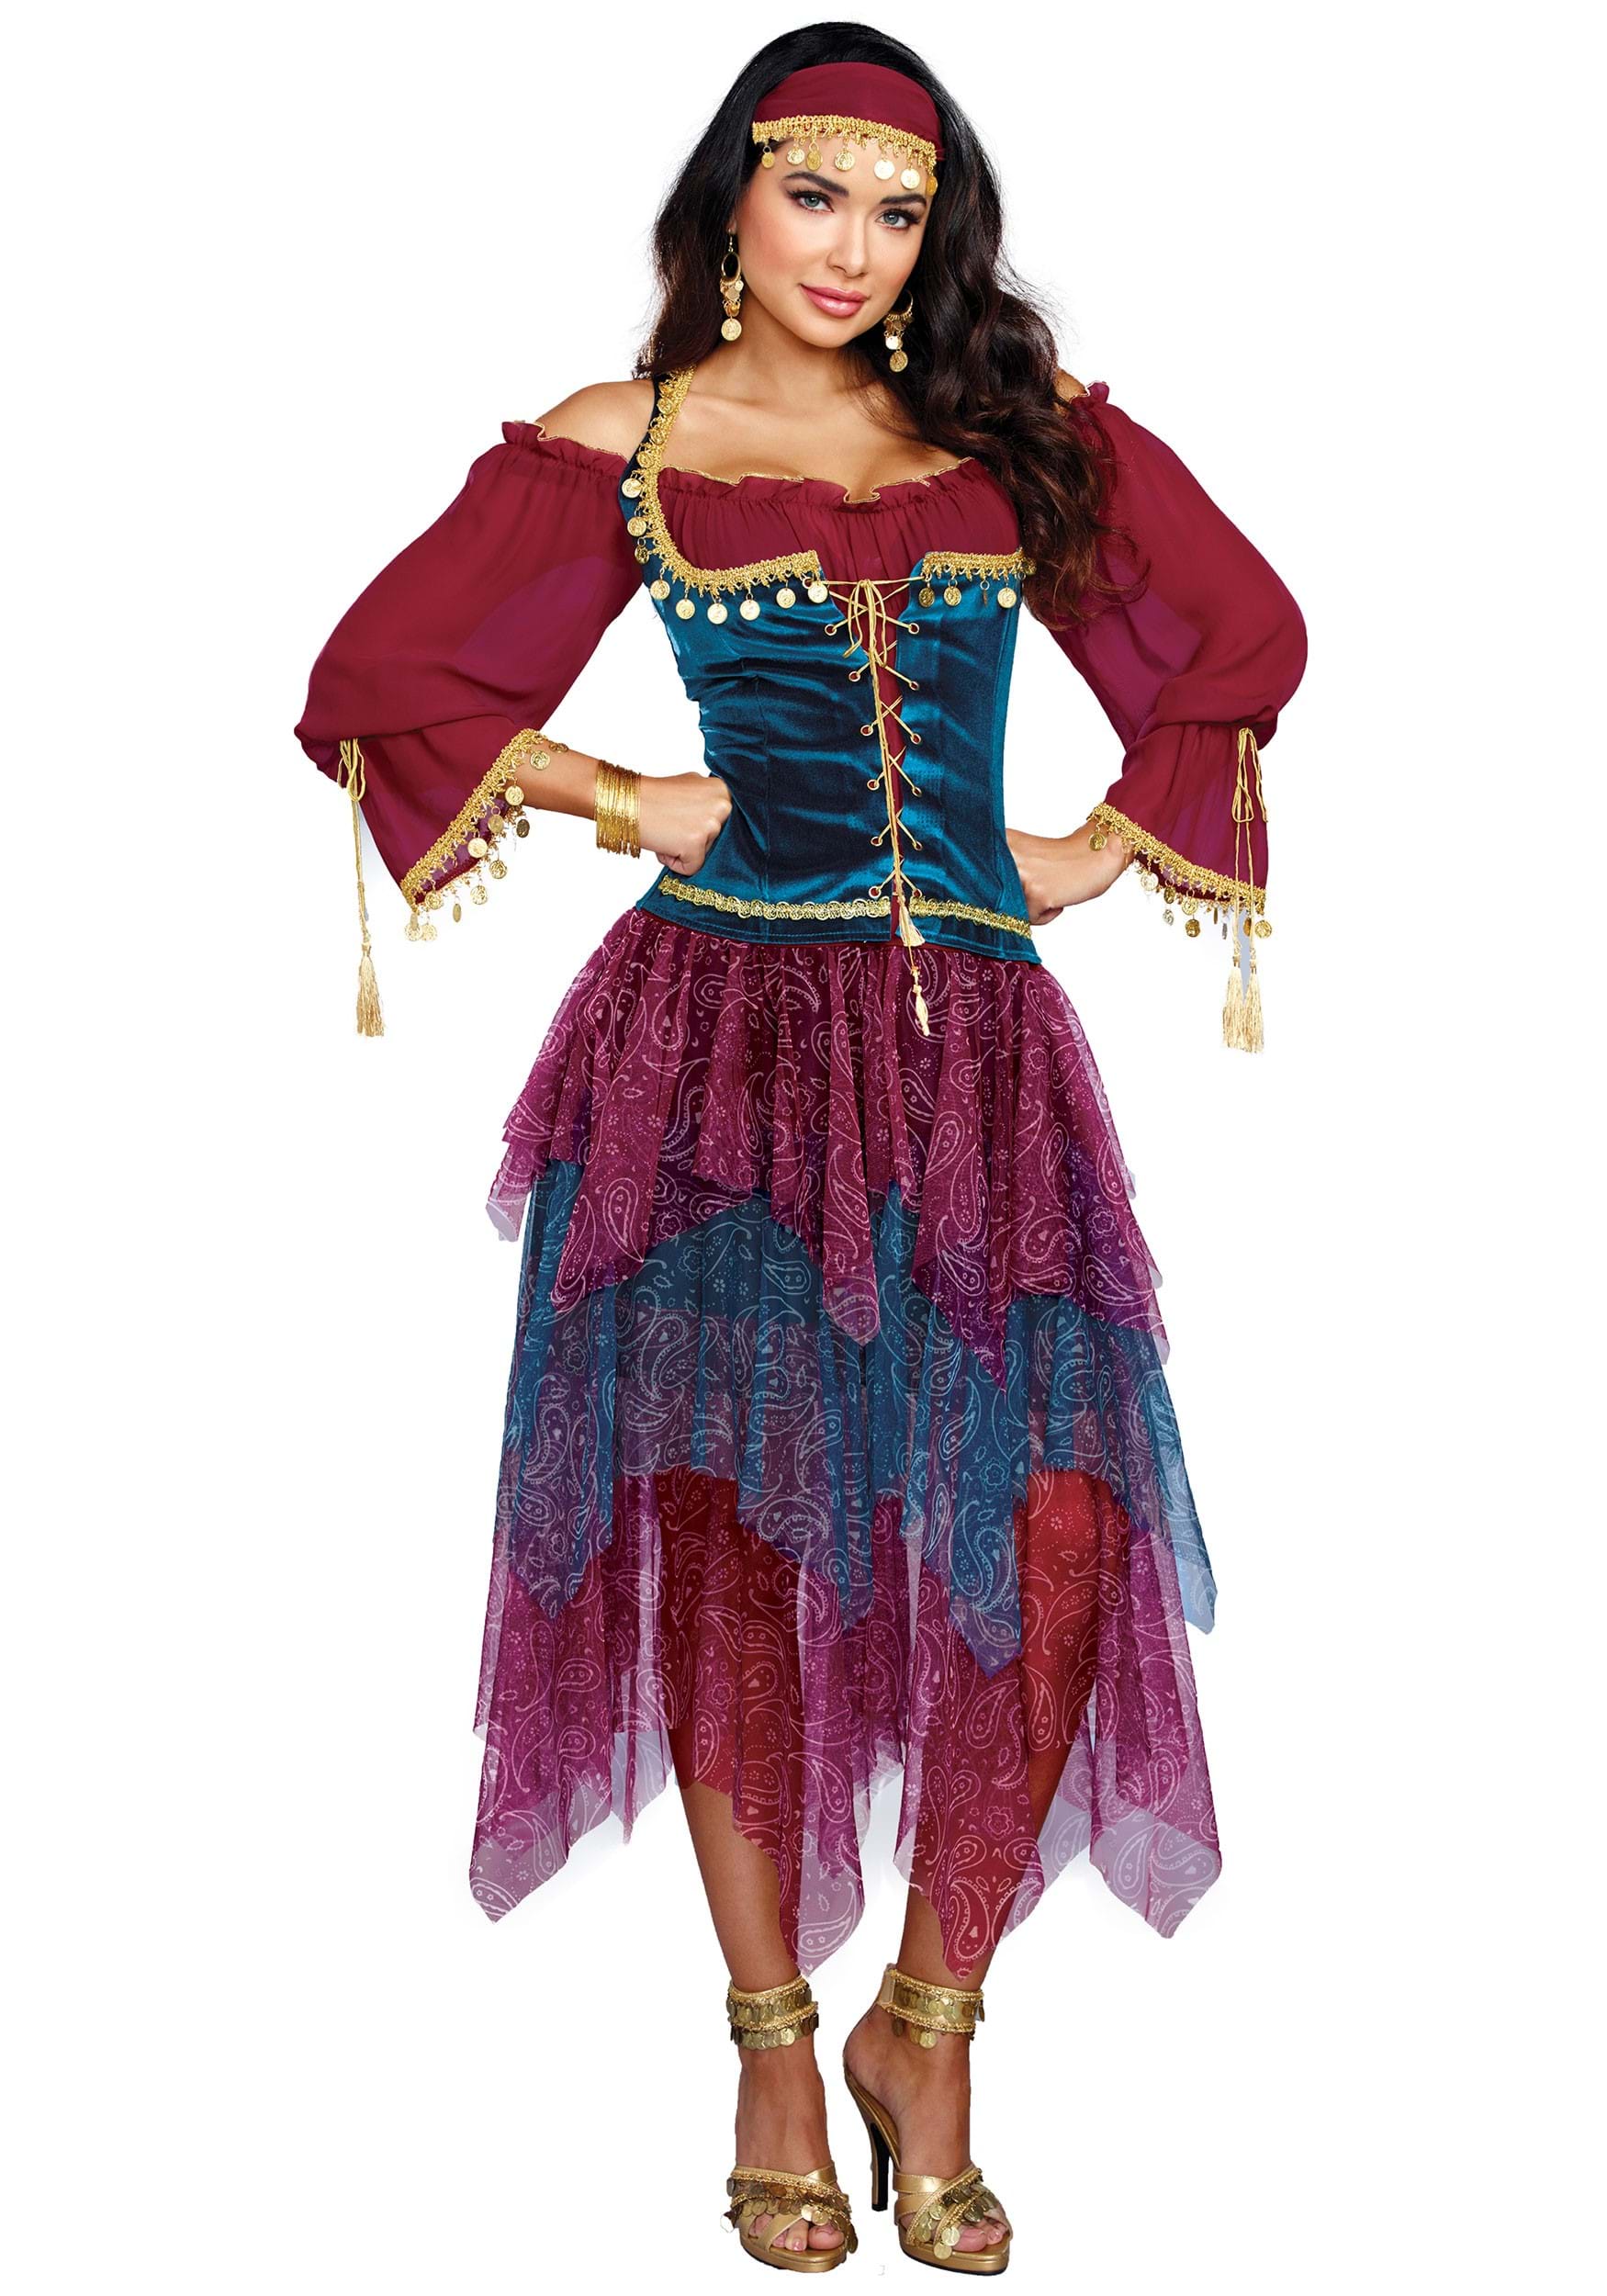 Image of Women's Mystical Fortune Teller Costume ID DR10669-S